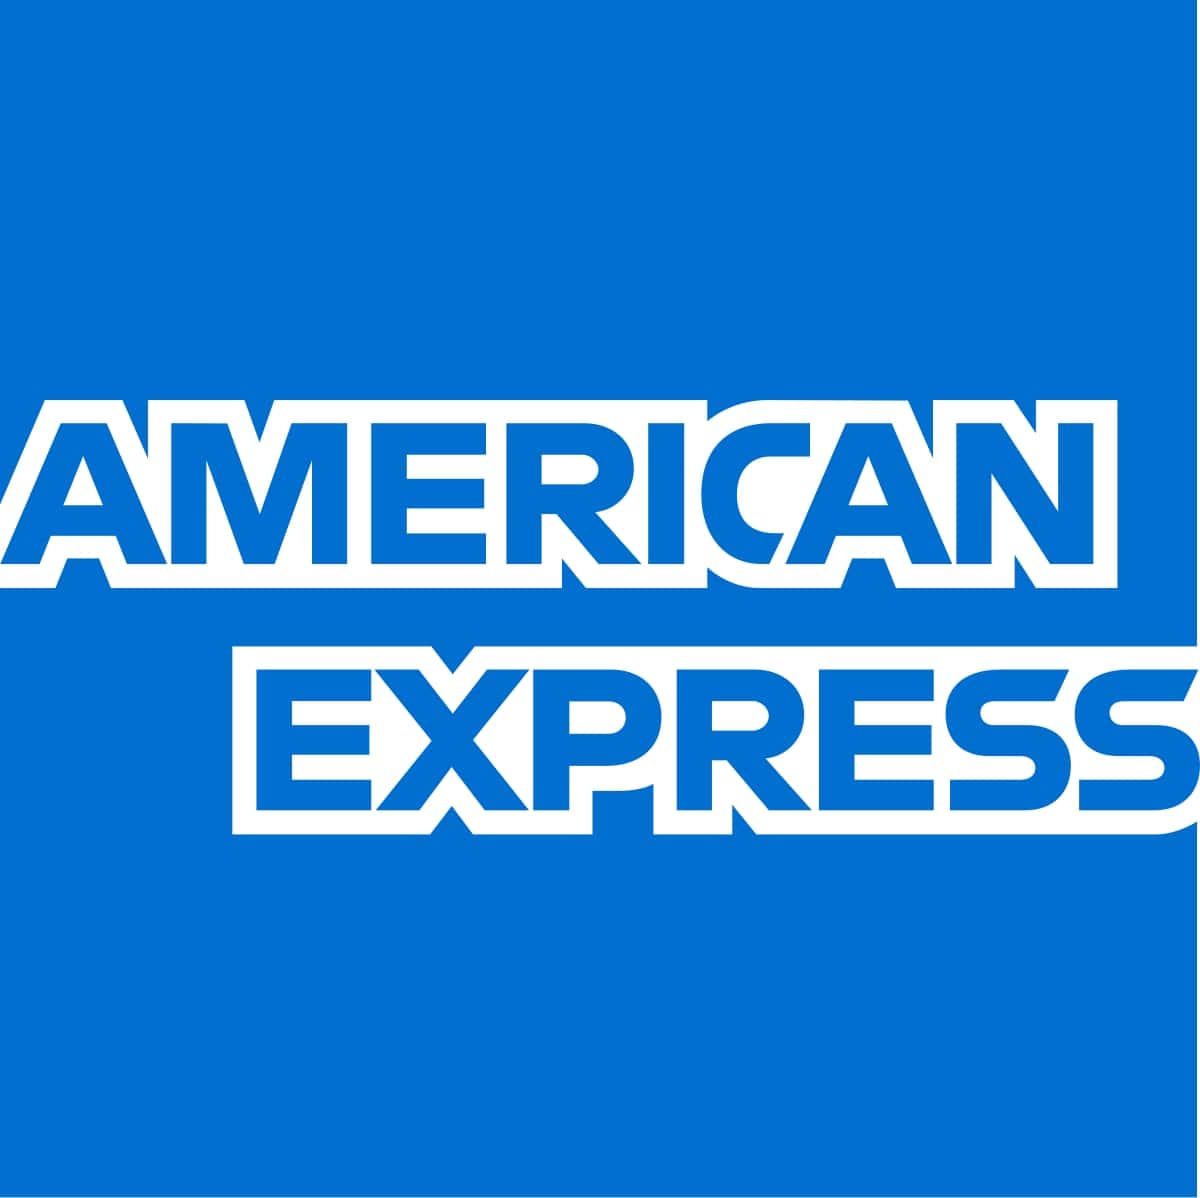 american express business travel customer service